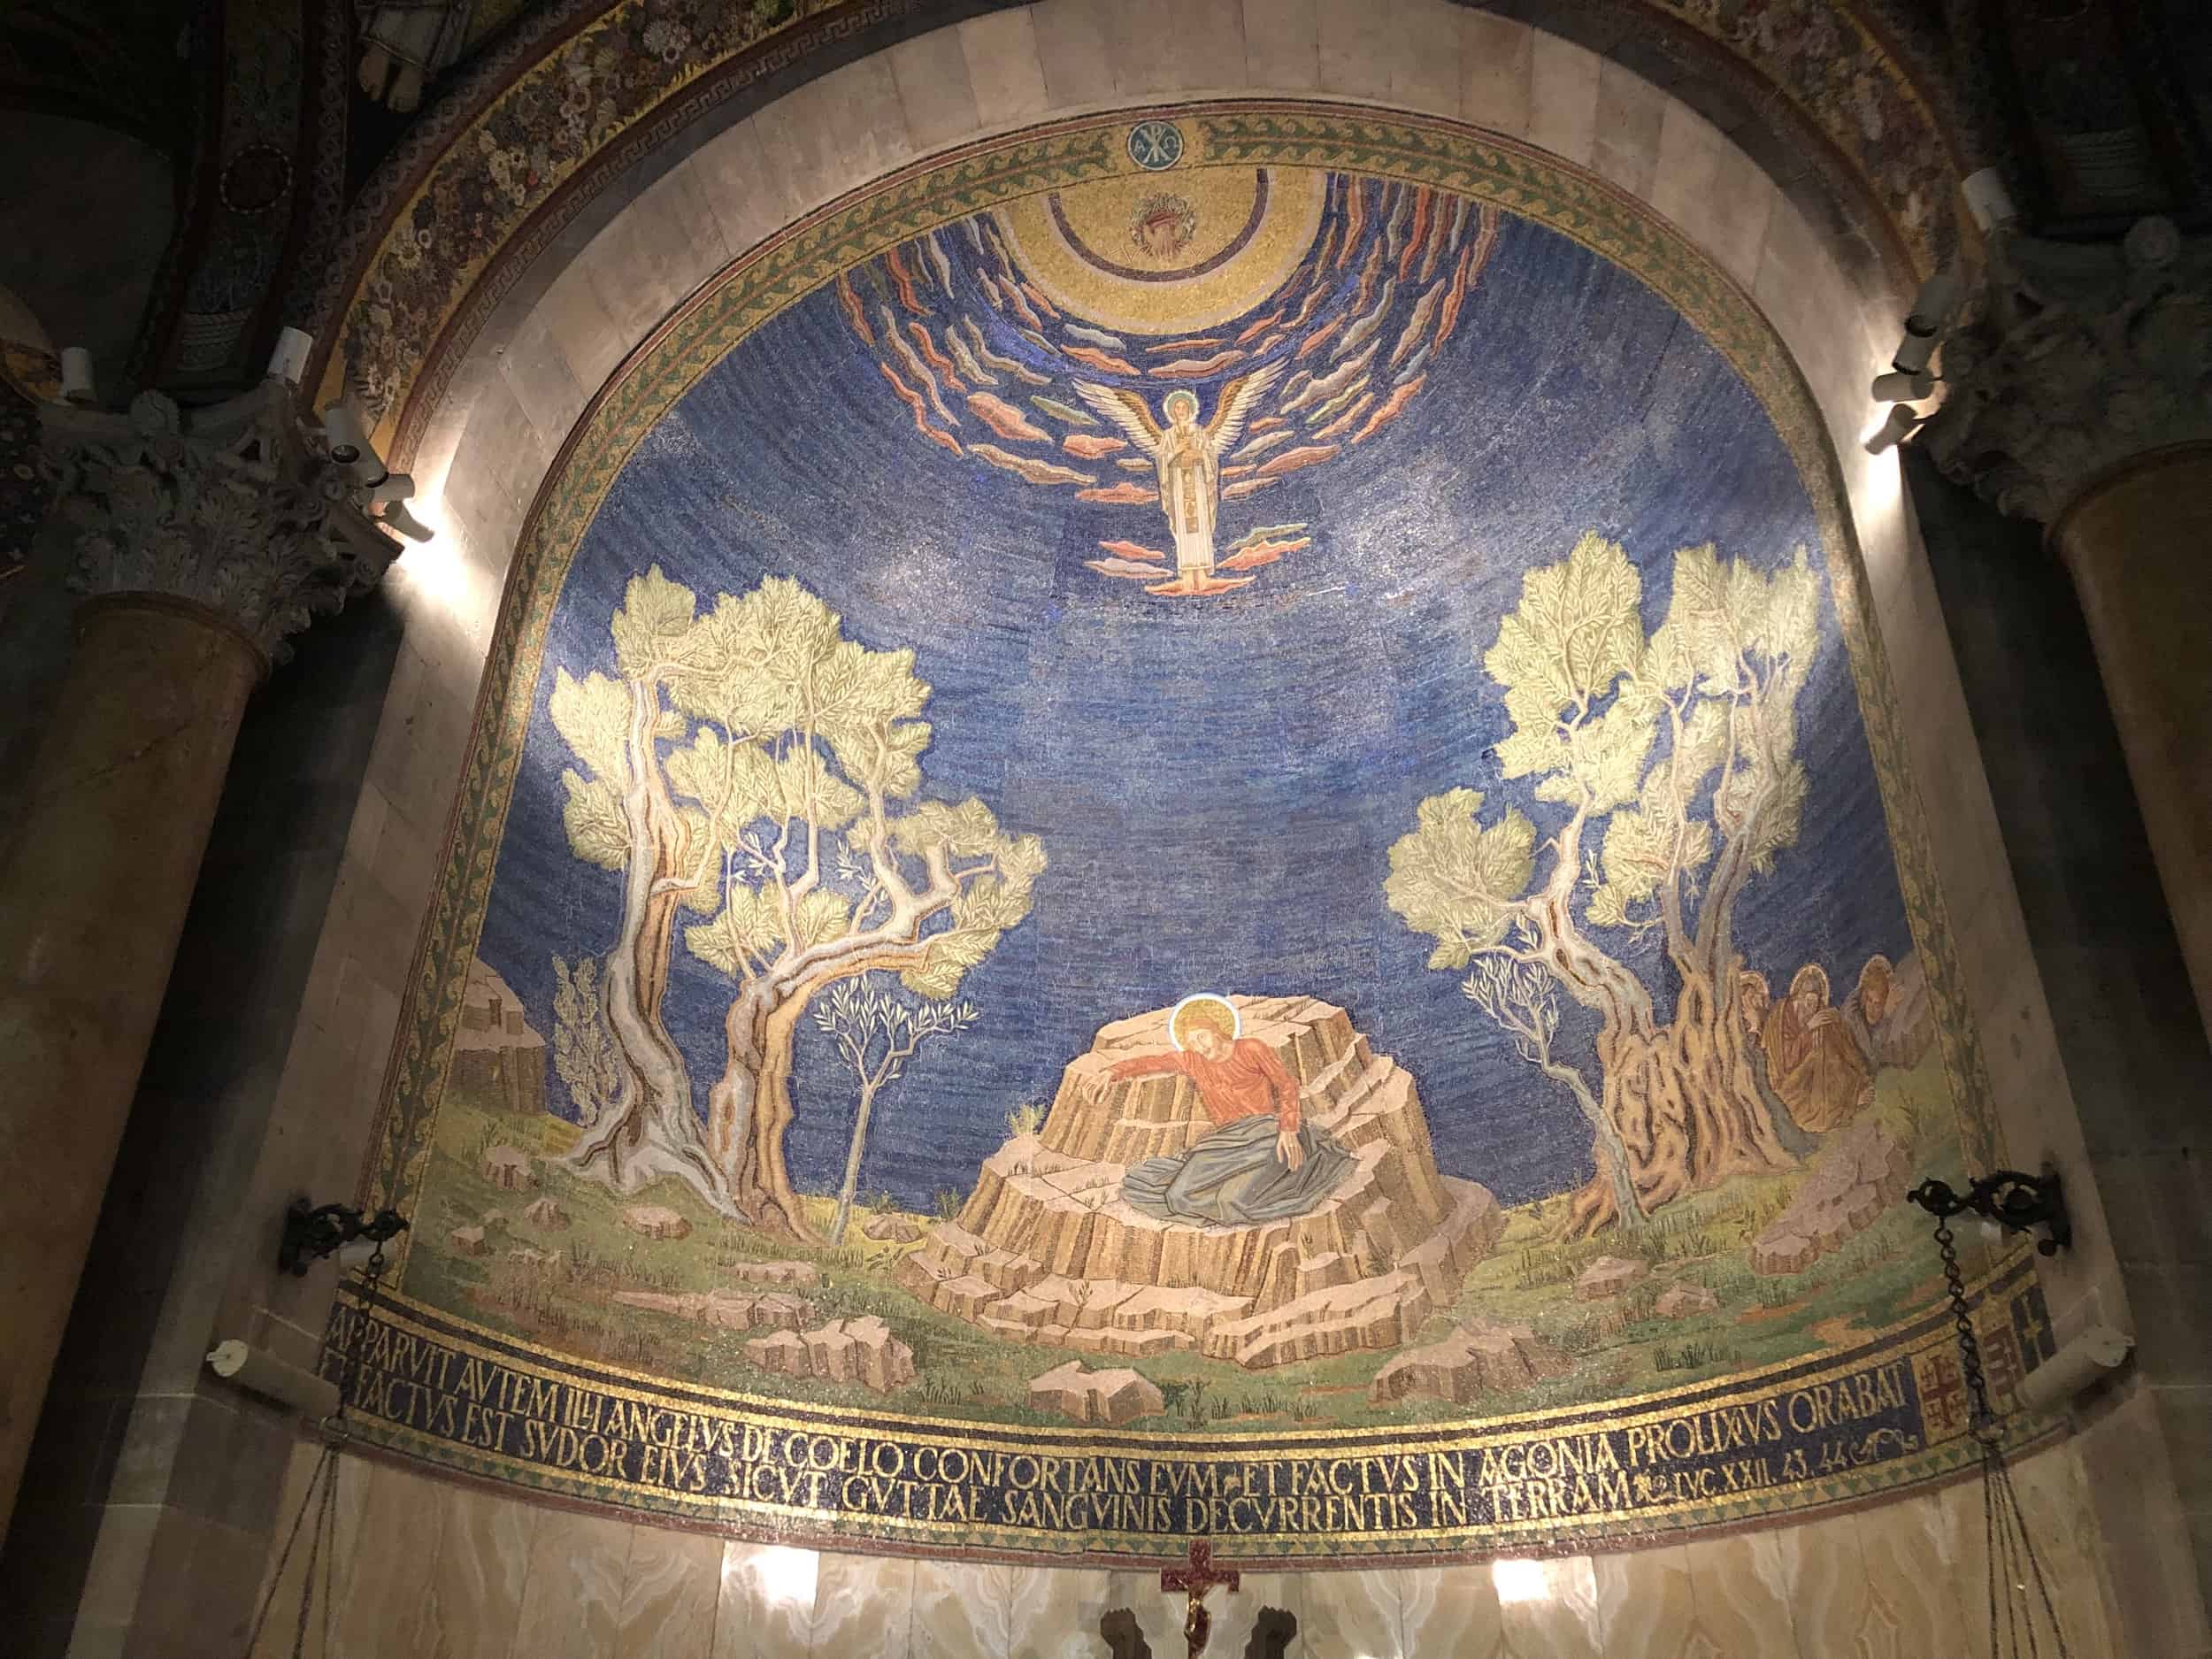 Mosaic of Christ in Agony in the Church of All Nations at Gethsemane in Jerusalem